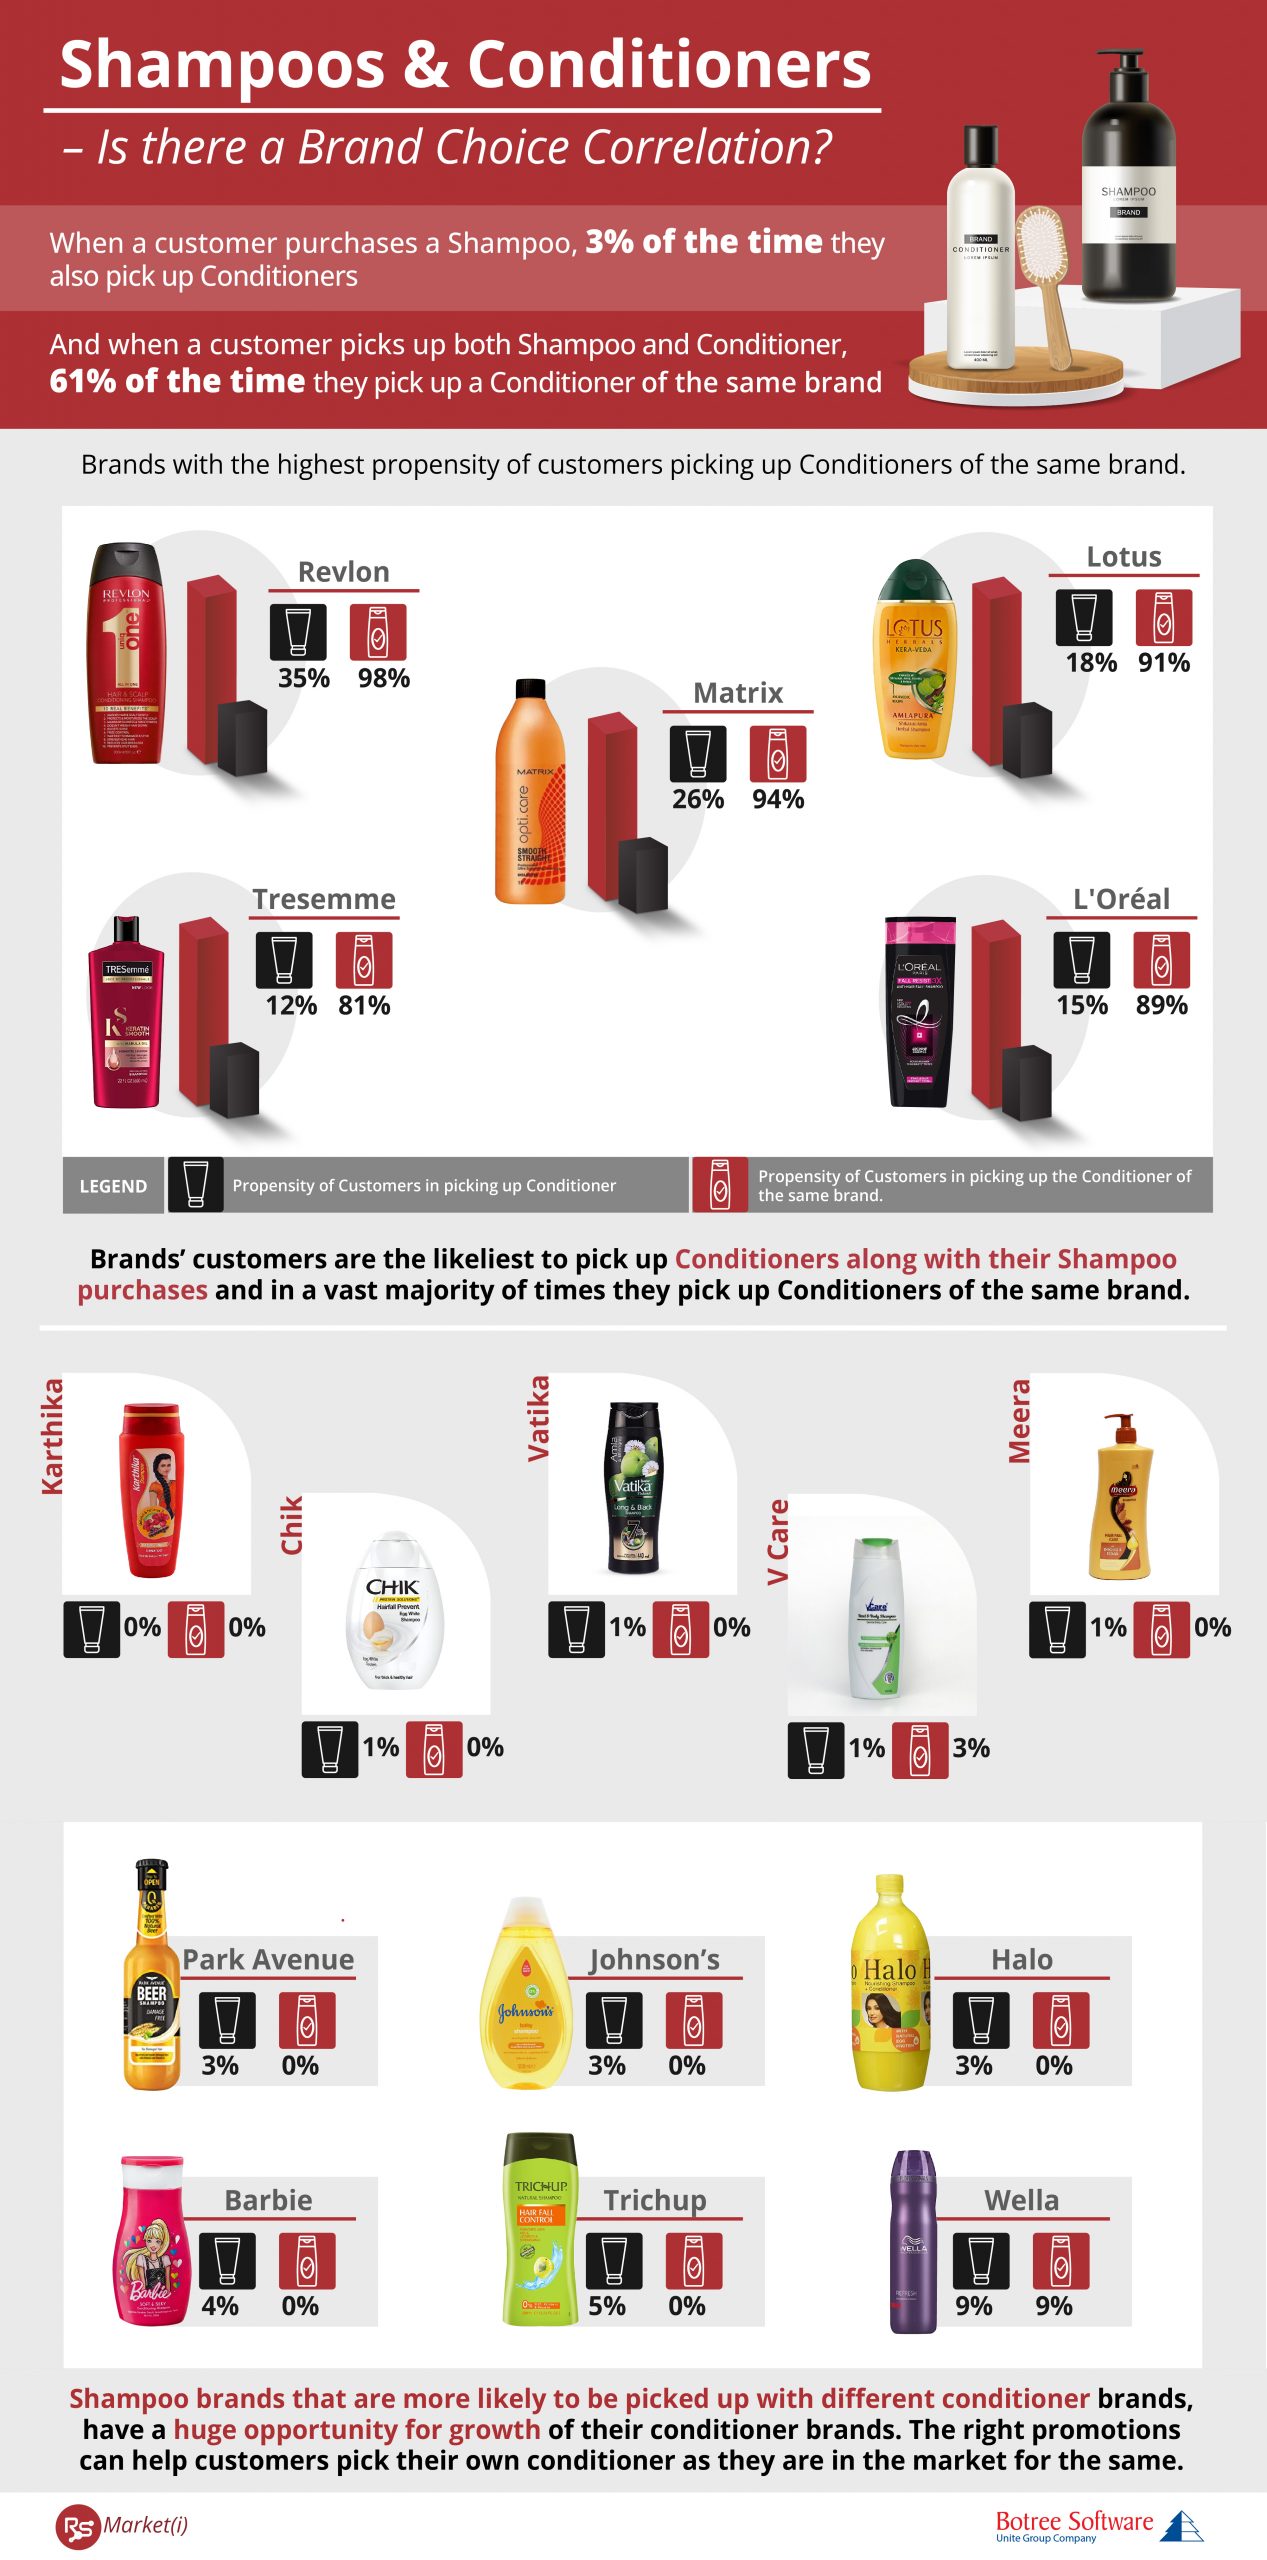 Infographic on Brand Correlation between Shampoo and Conditioners for shoppers